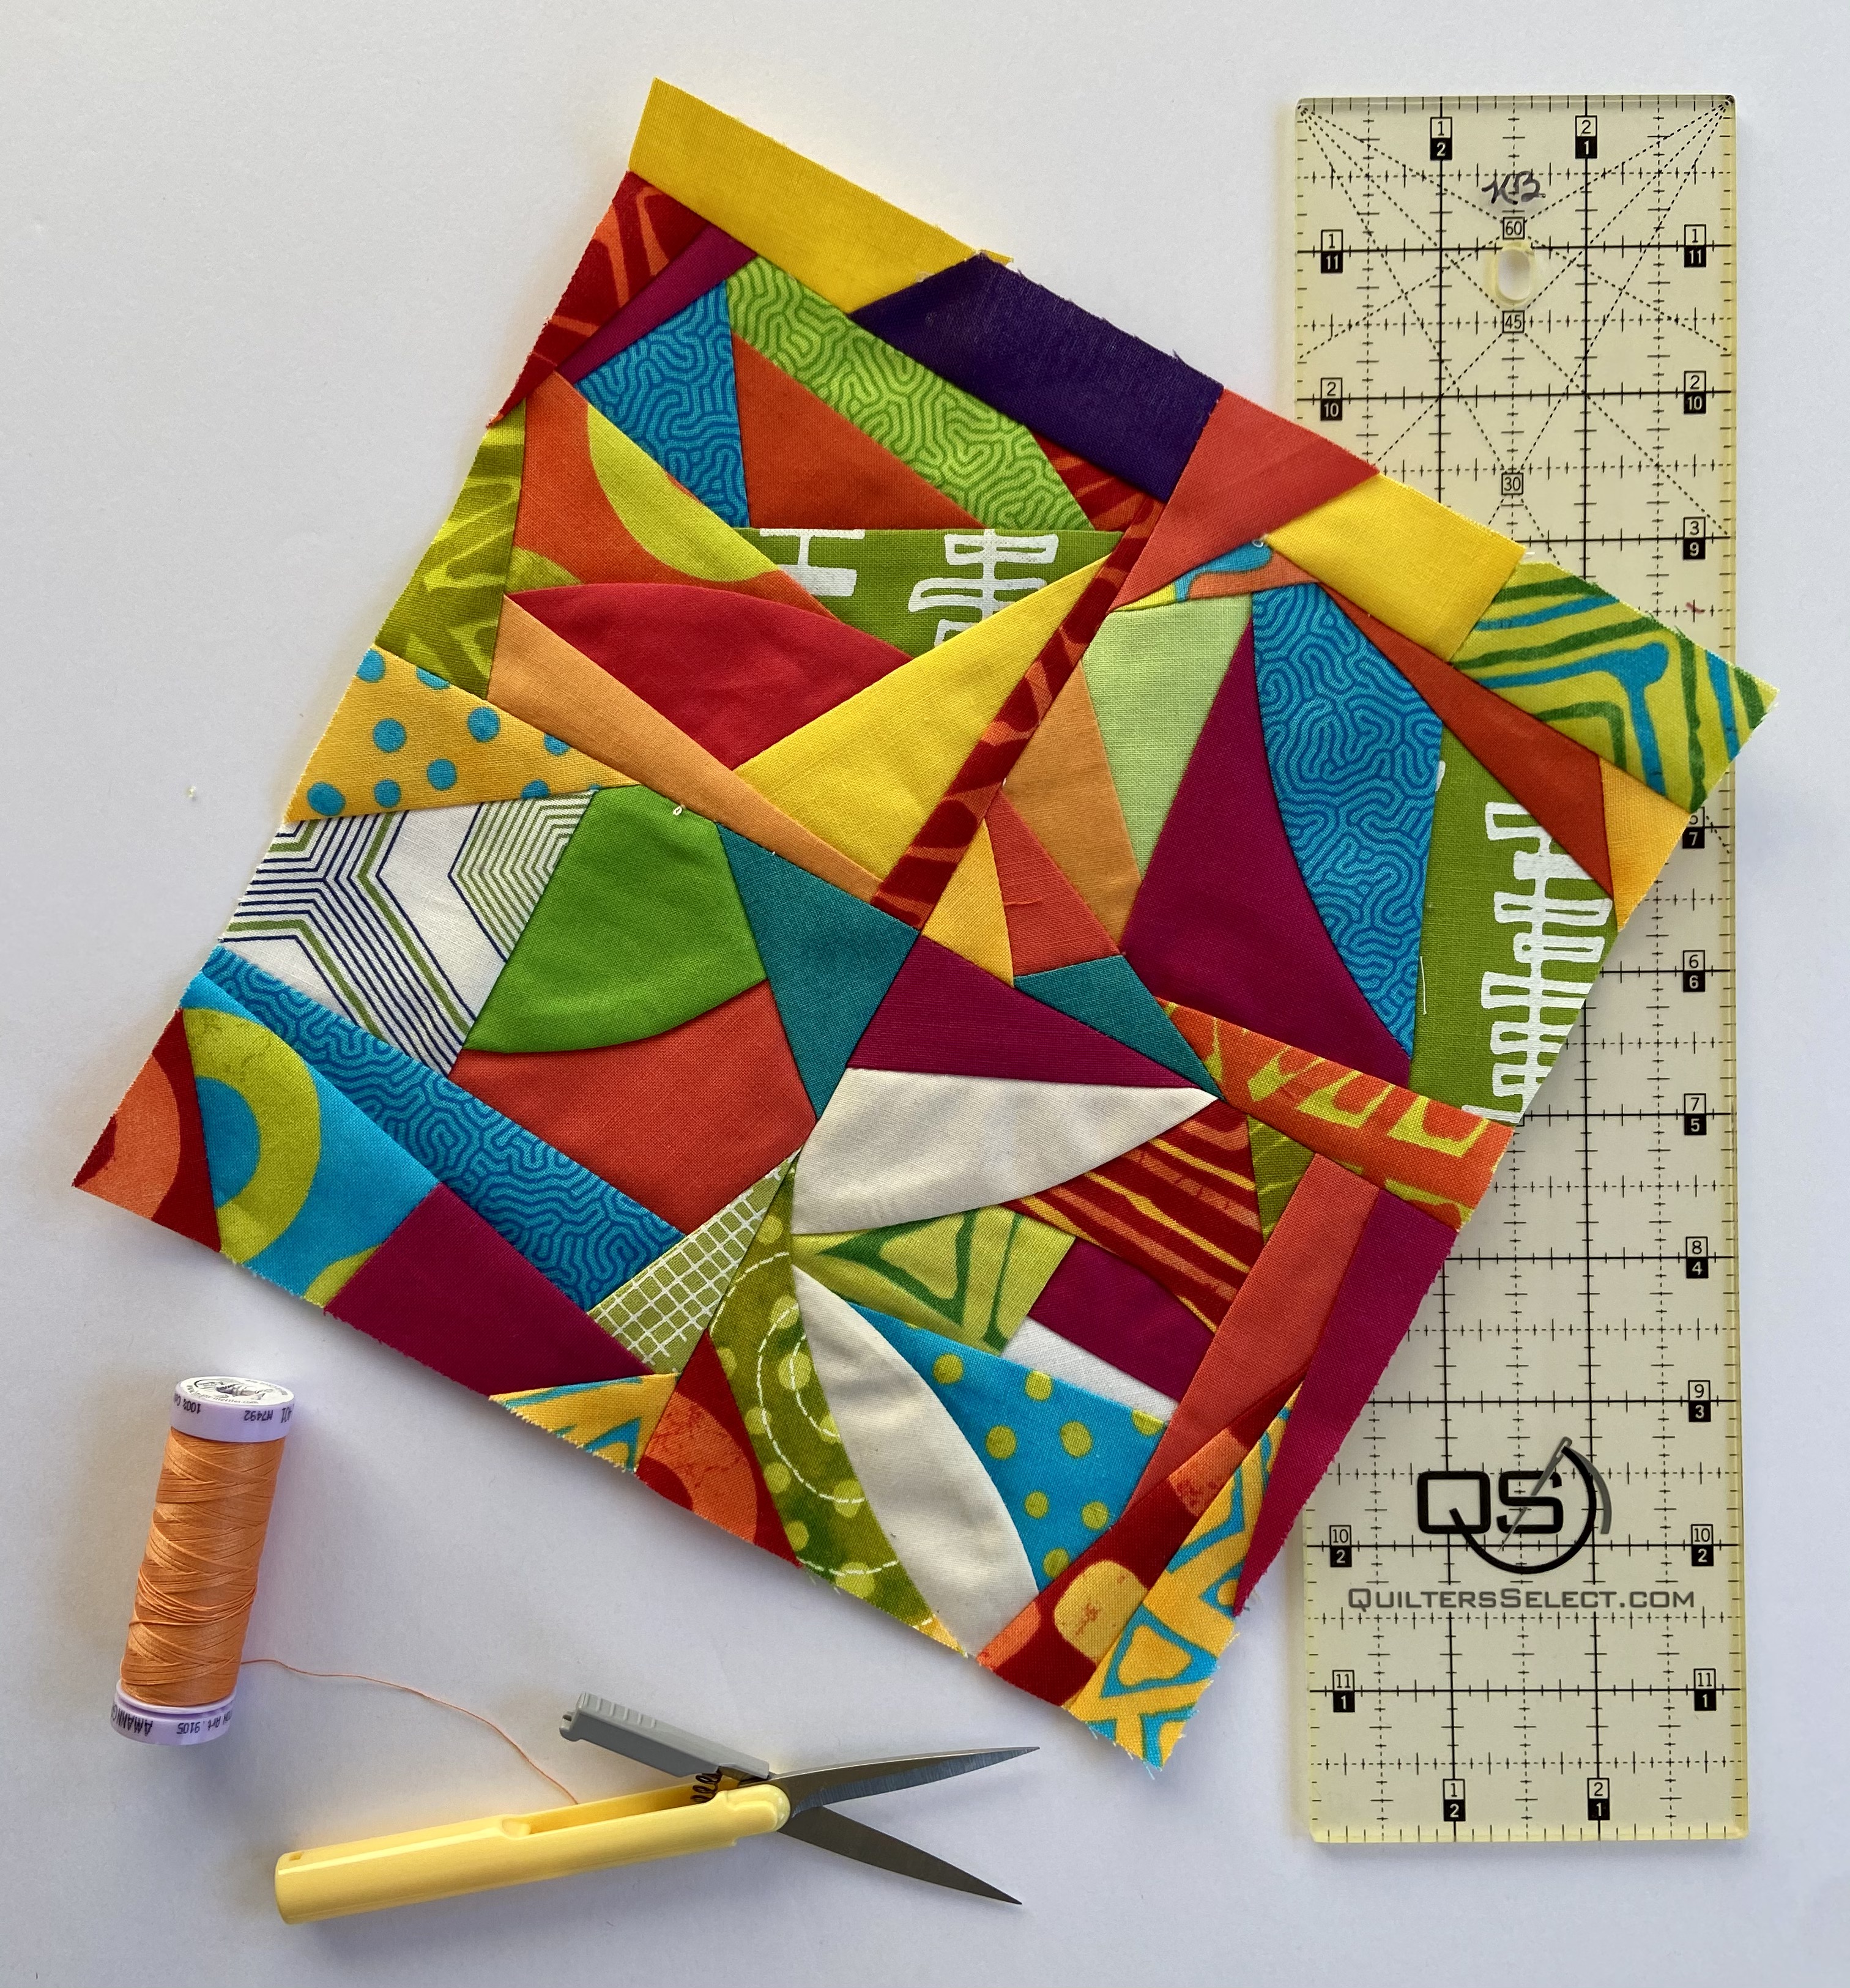 Cazy quilt block made of small scraps, with spool of thread, thread nippers, and rotary ruler.